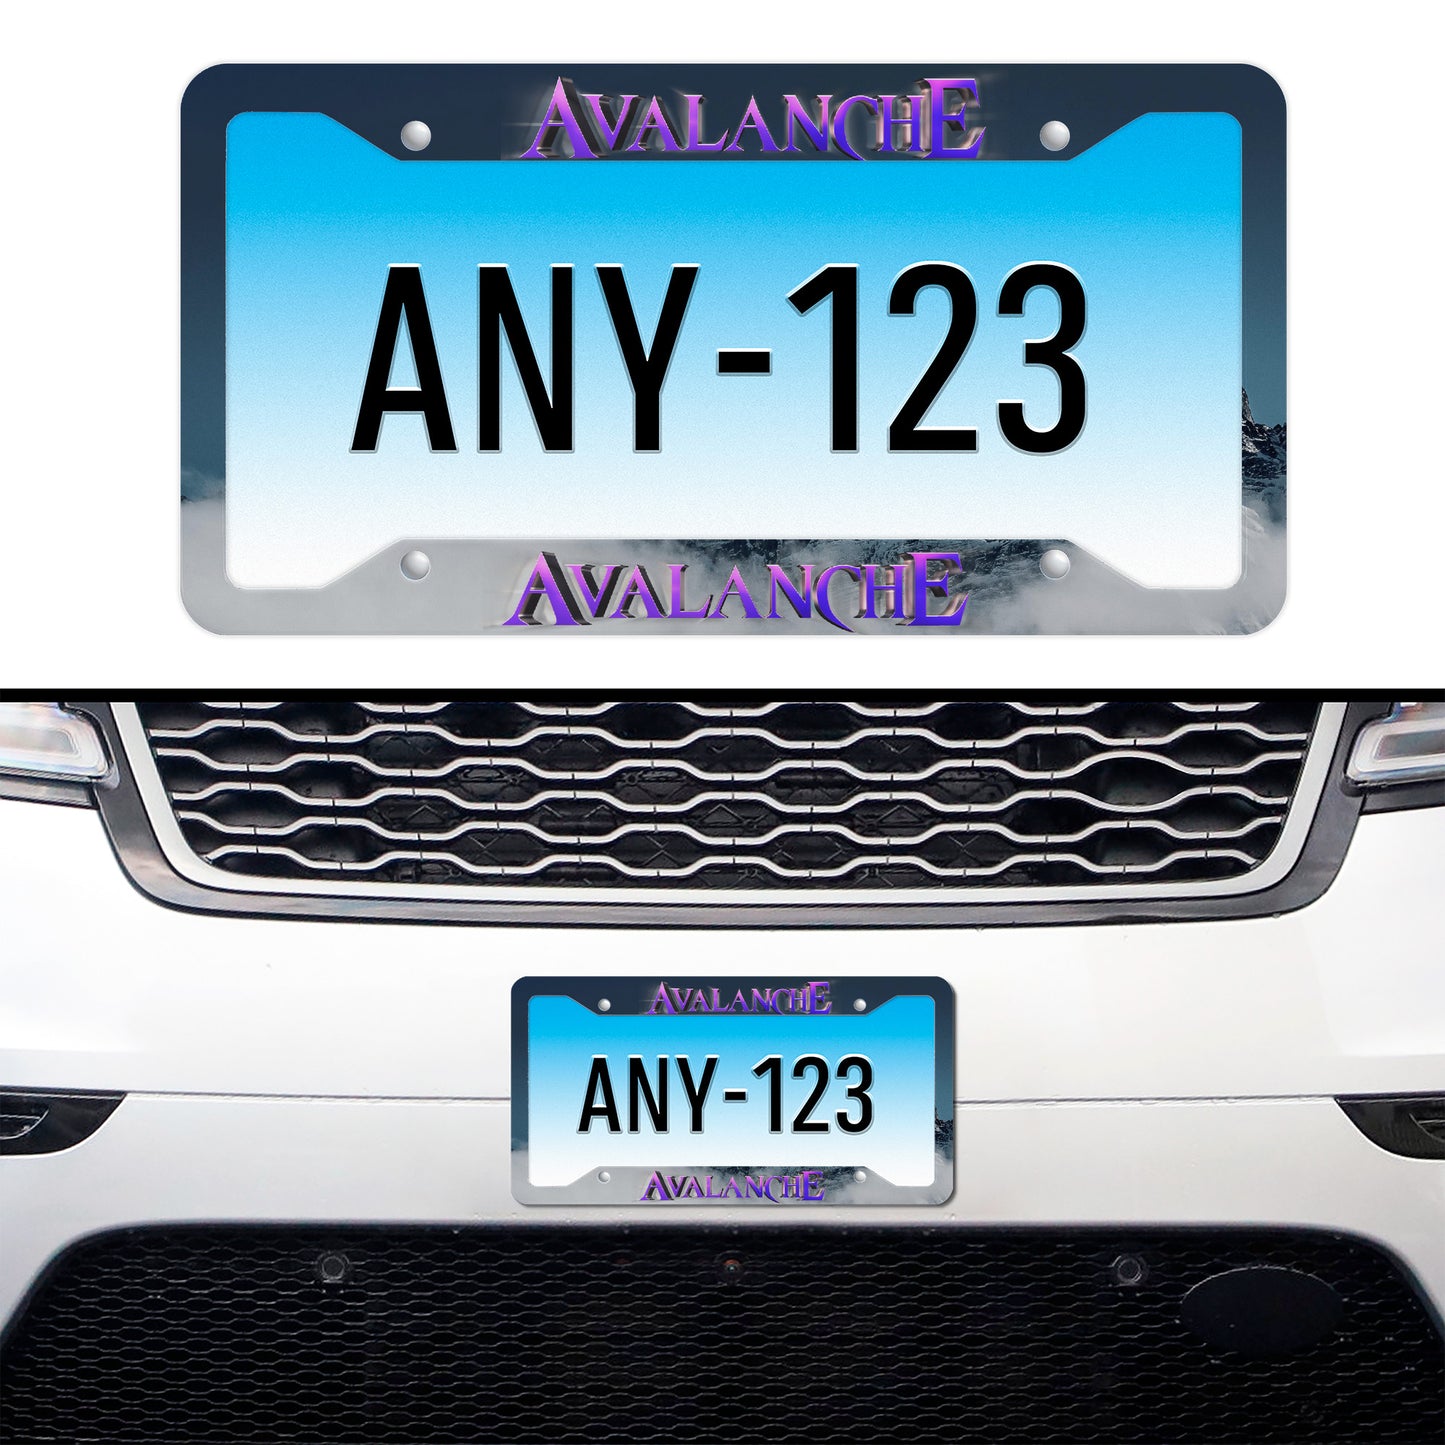 Avalanche Customized License Plate Frames